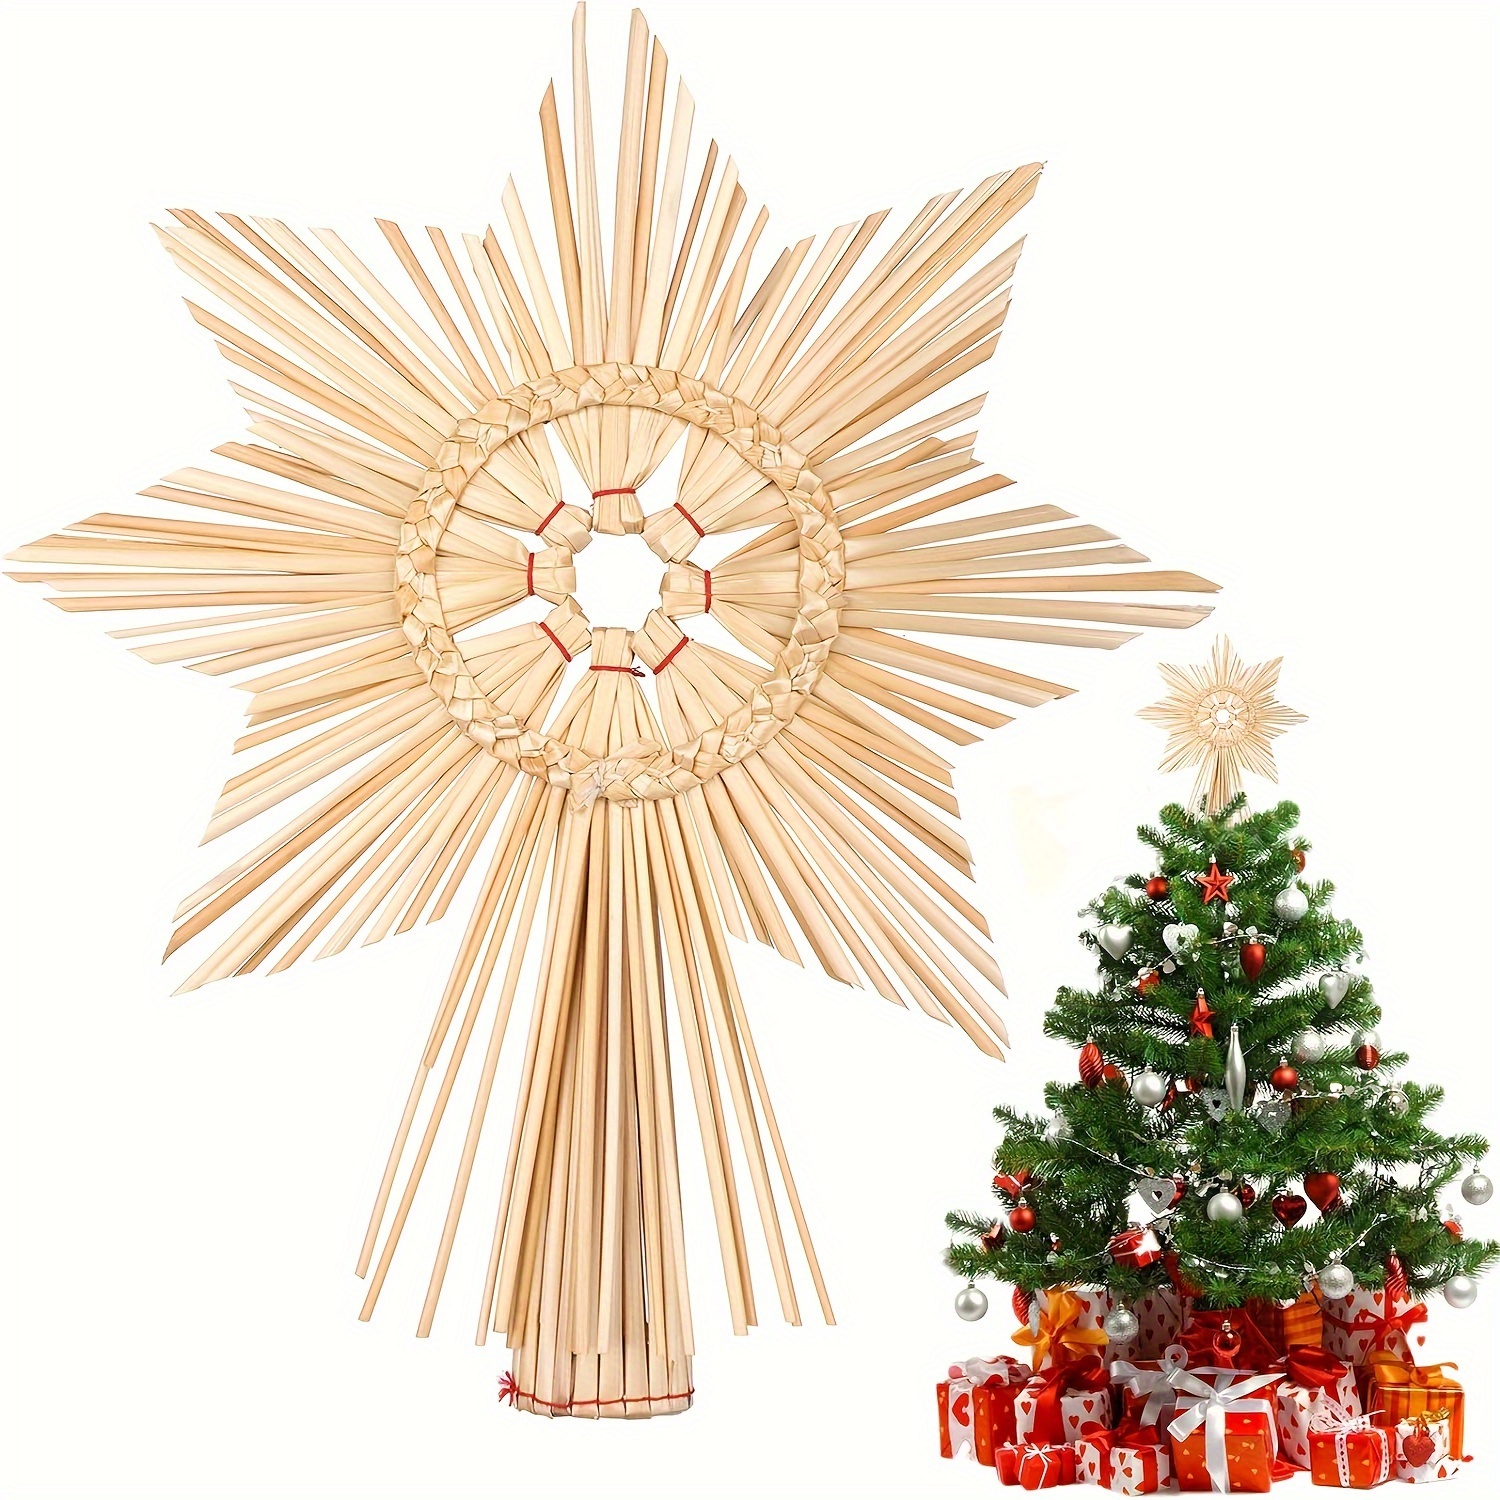 Tree Topper made of straw